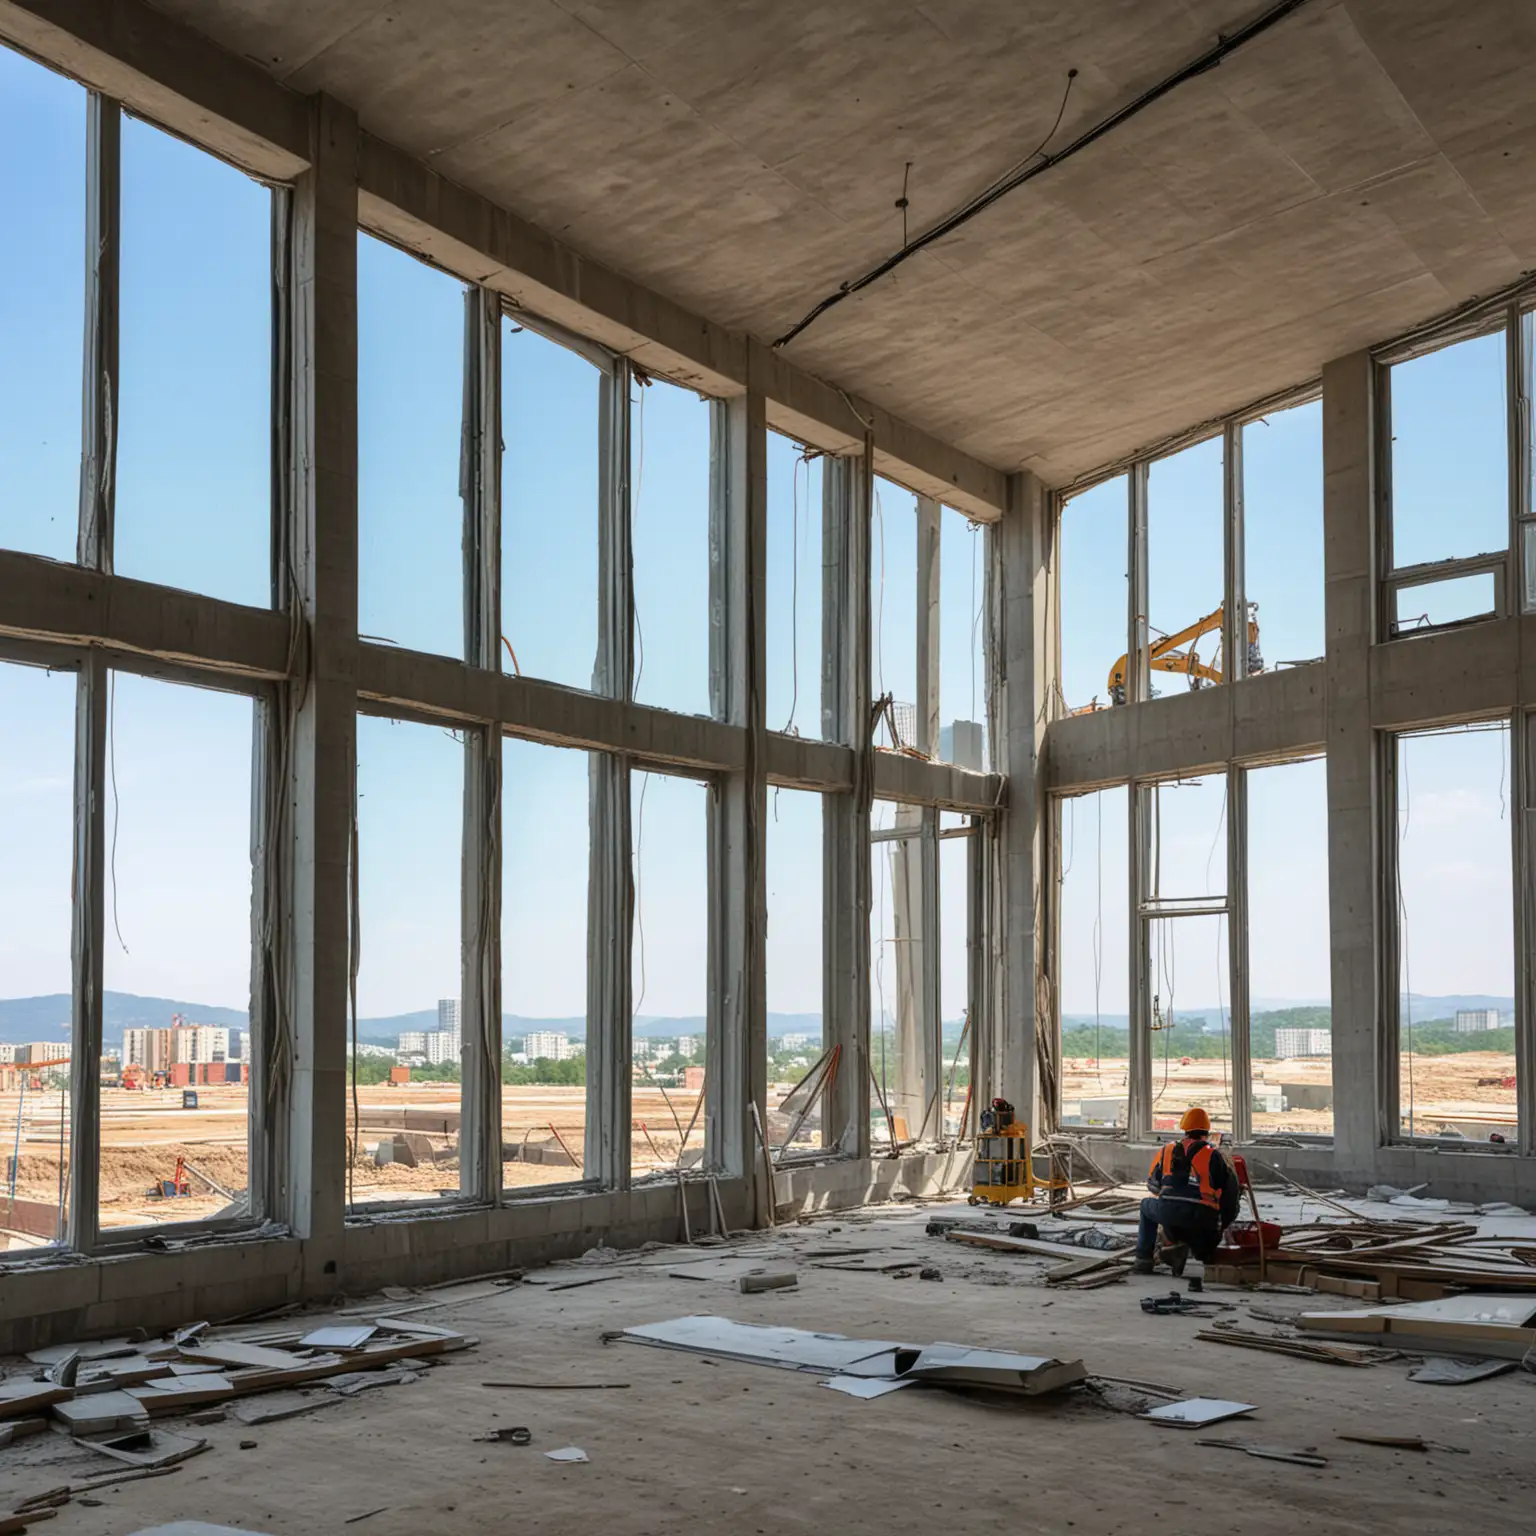 Engineers Working Inside Modern Building Under Construction with Blue Sky Through Windows